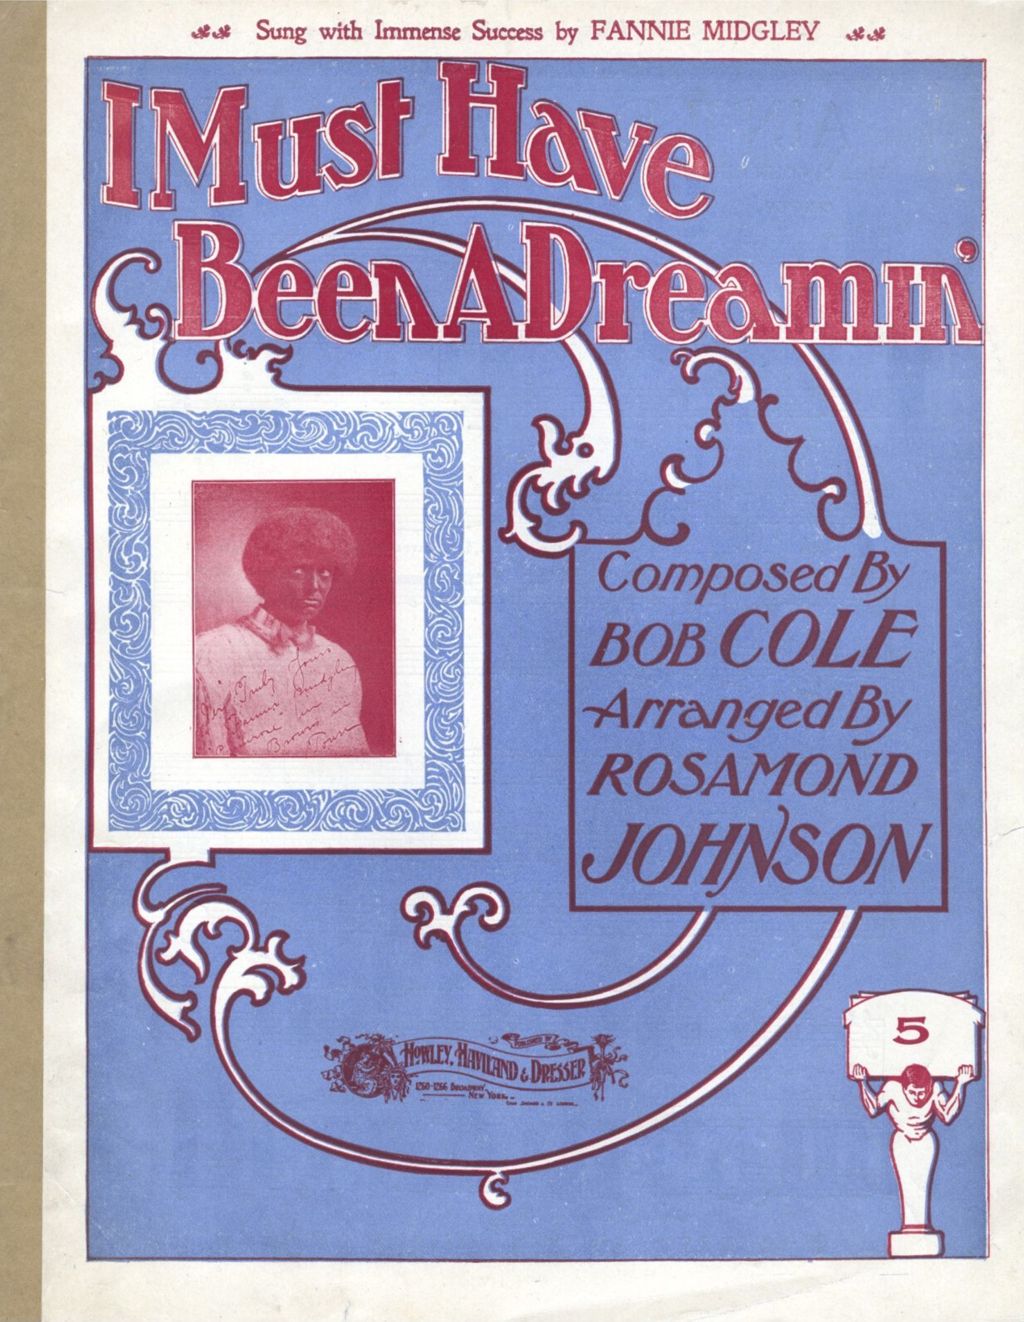 Miniature of I Must Have Been A Dreamin'